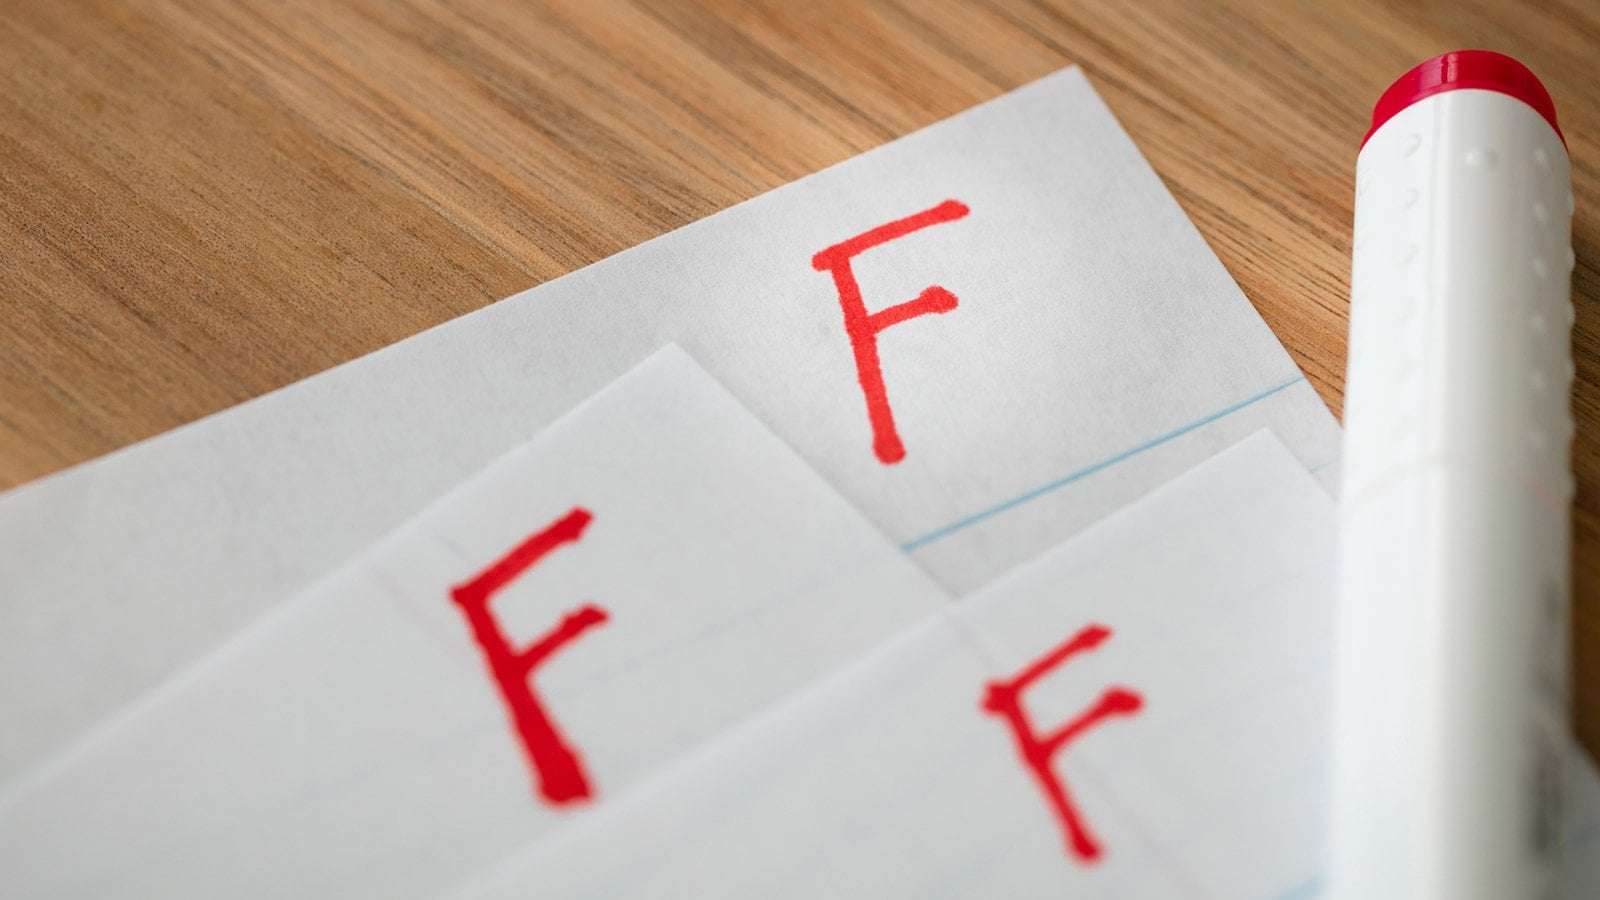 image for Professor Flunks All His Students After ChatGPT Falsely Claims It Wrote Their Papers